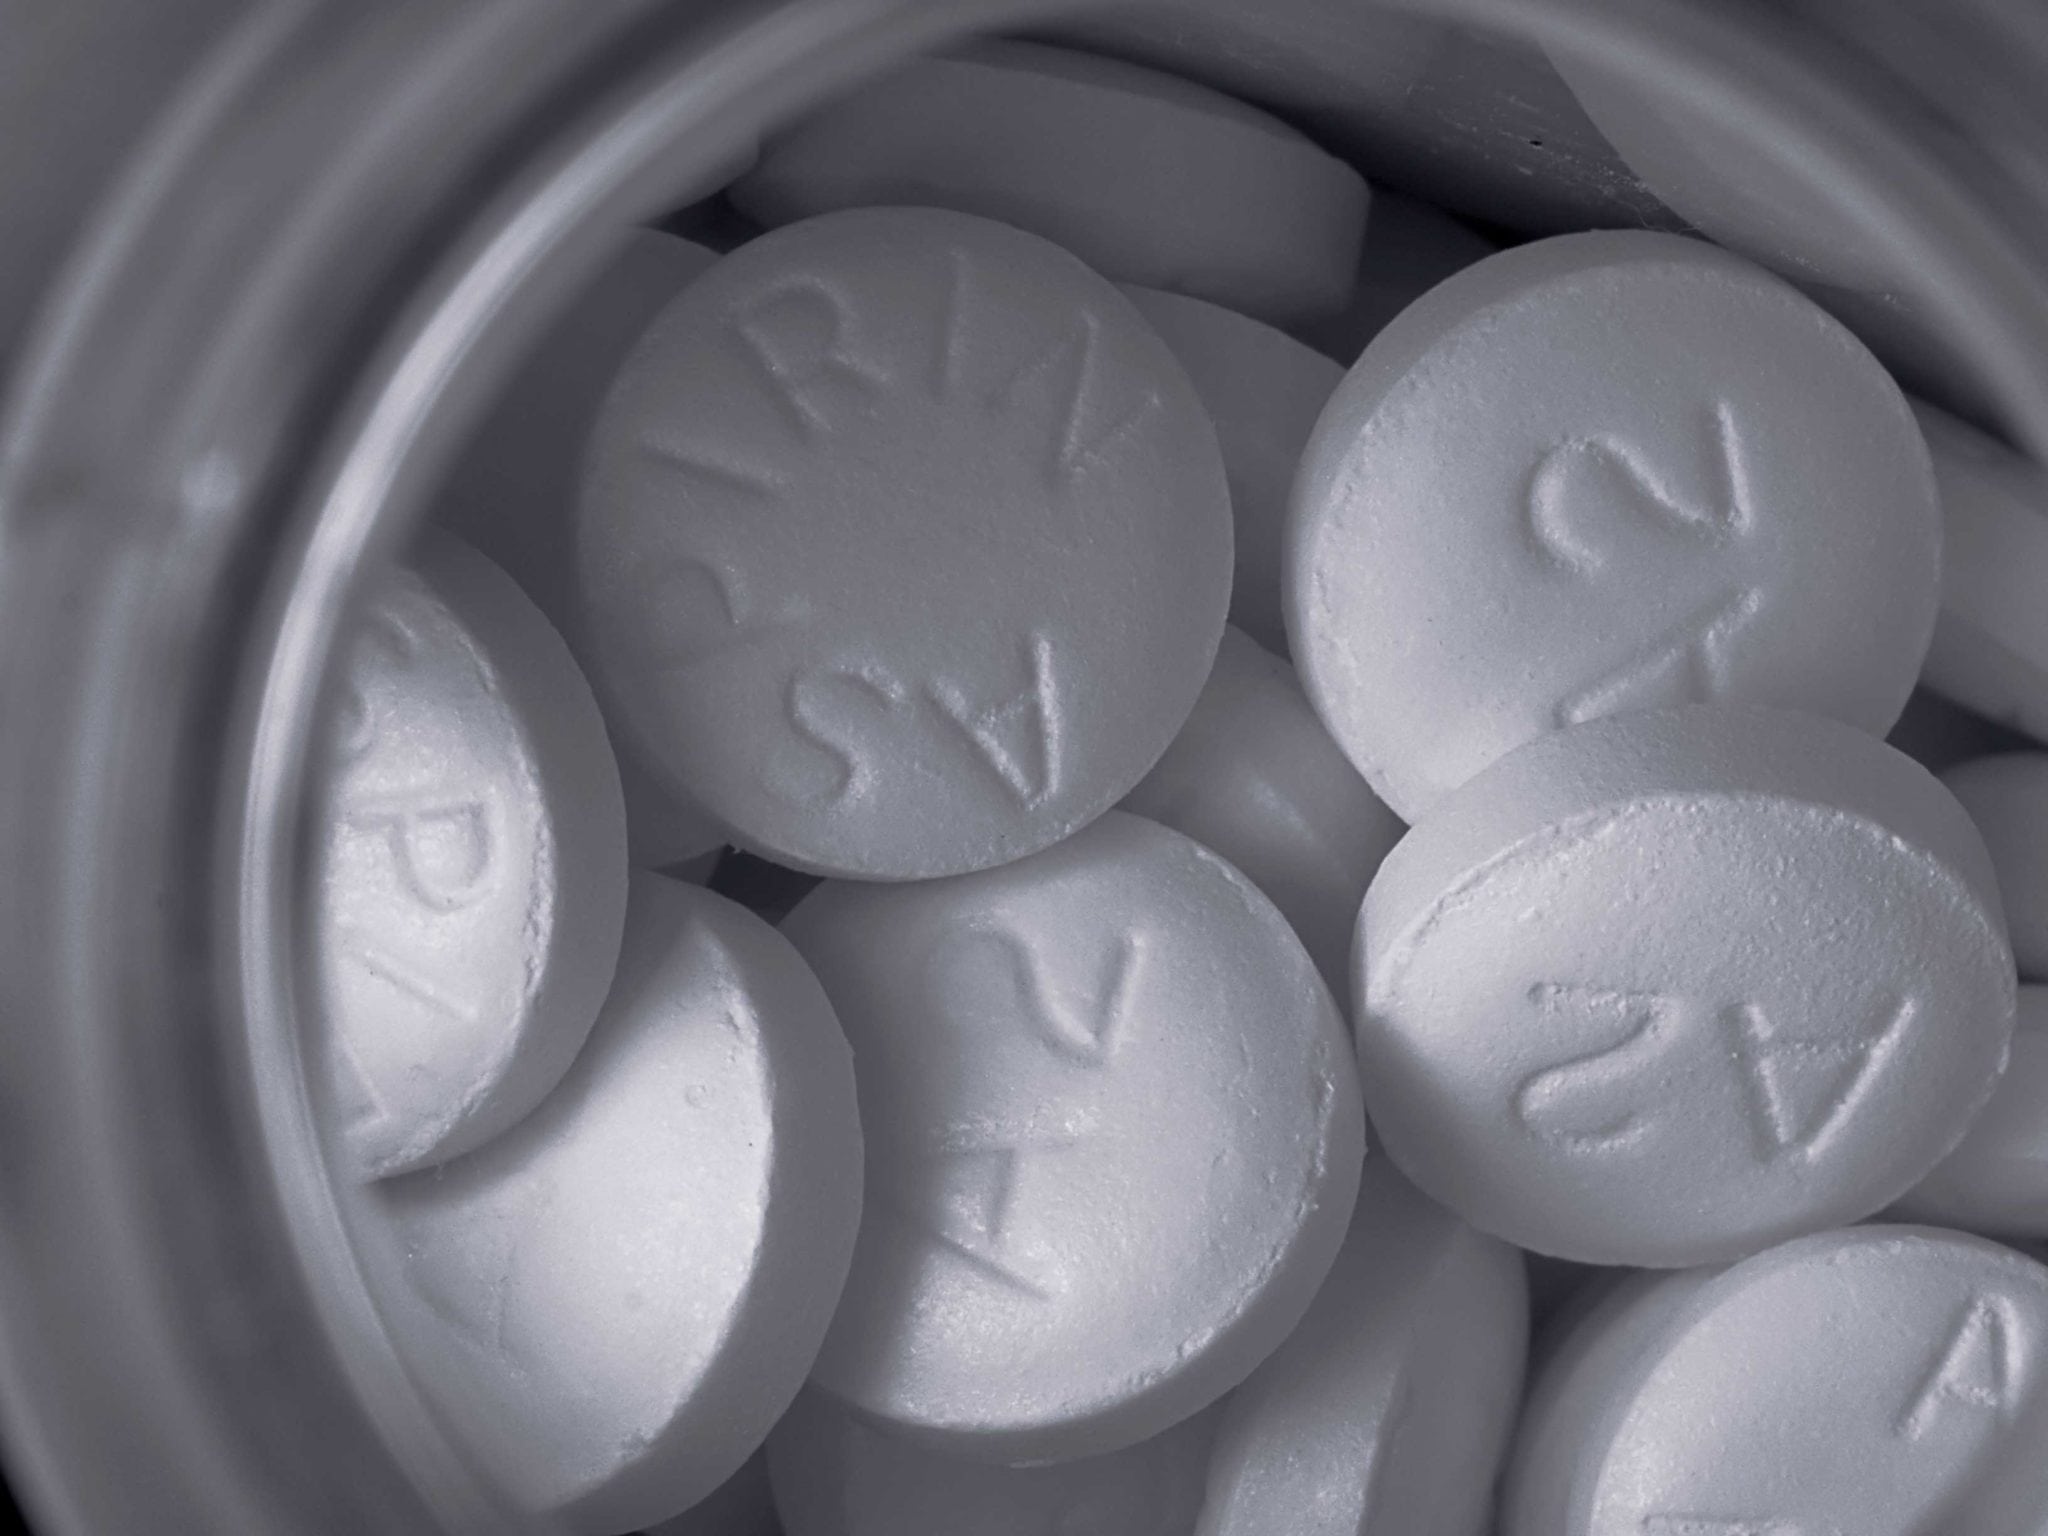 Why The Shift in Recommending Daily Aspirin For Heart Health?